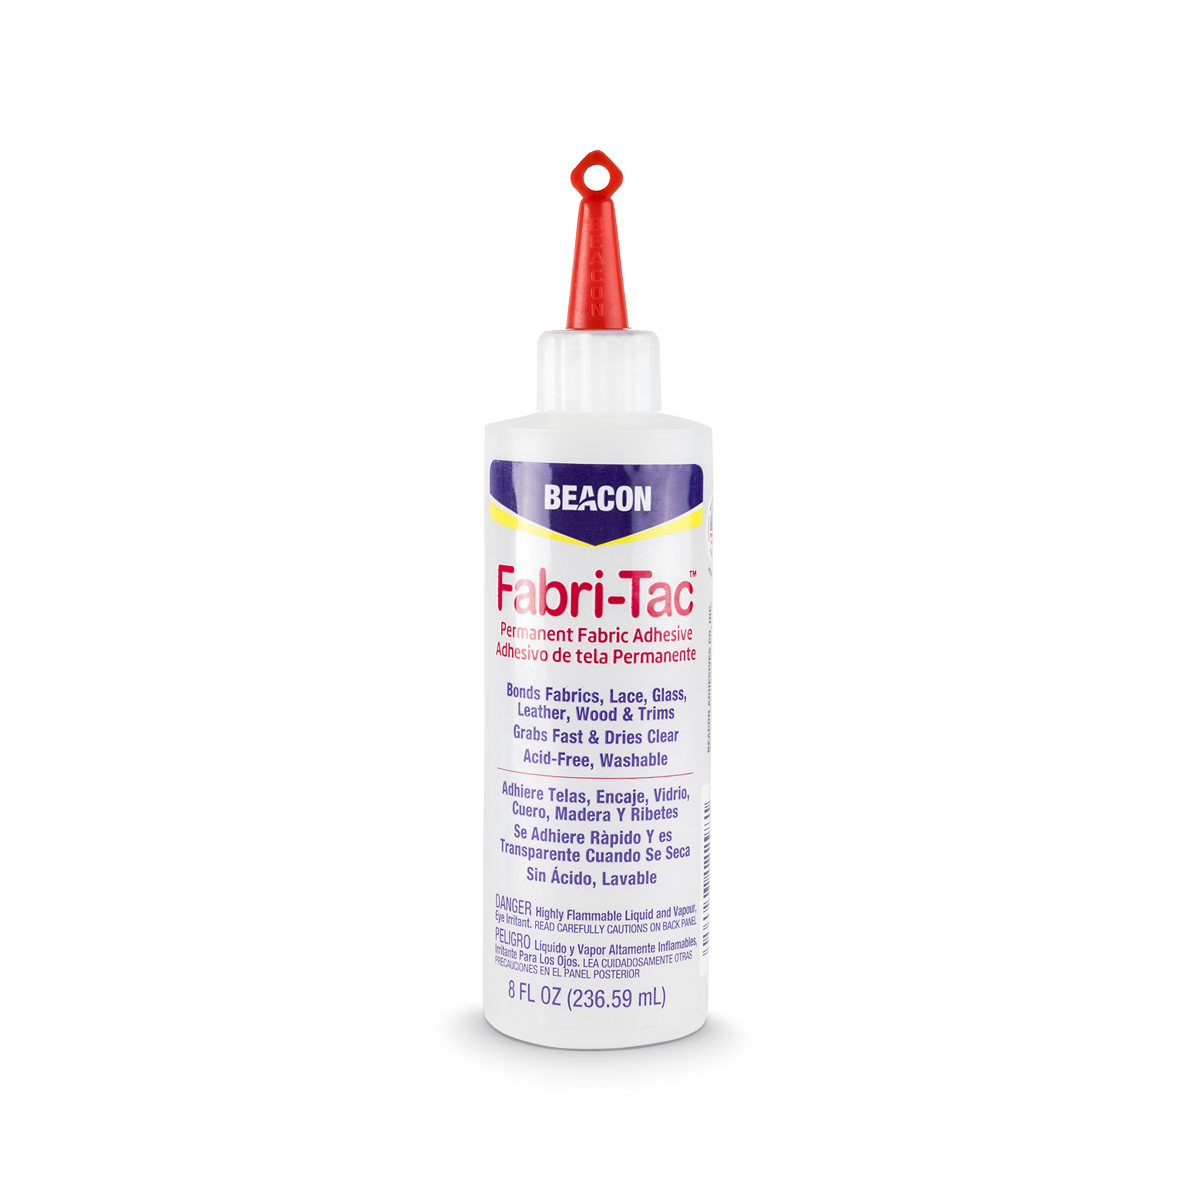 how long does it take fabritac glue to dry for rerouting? : r